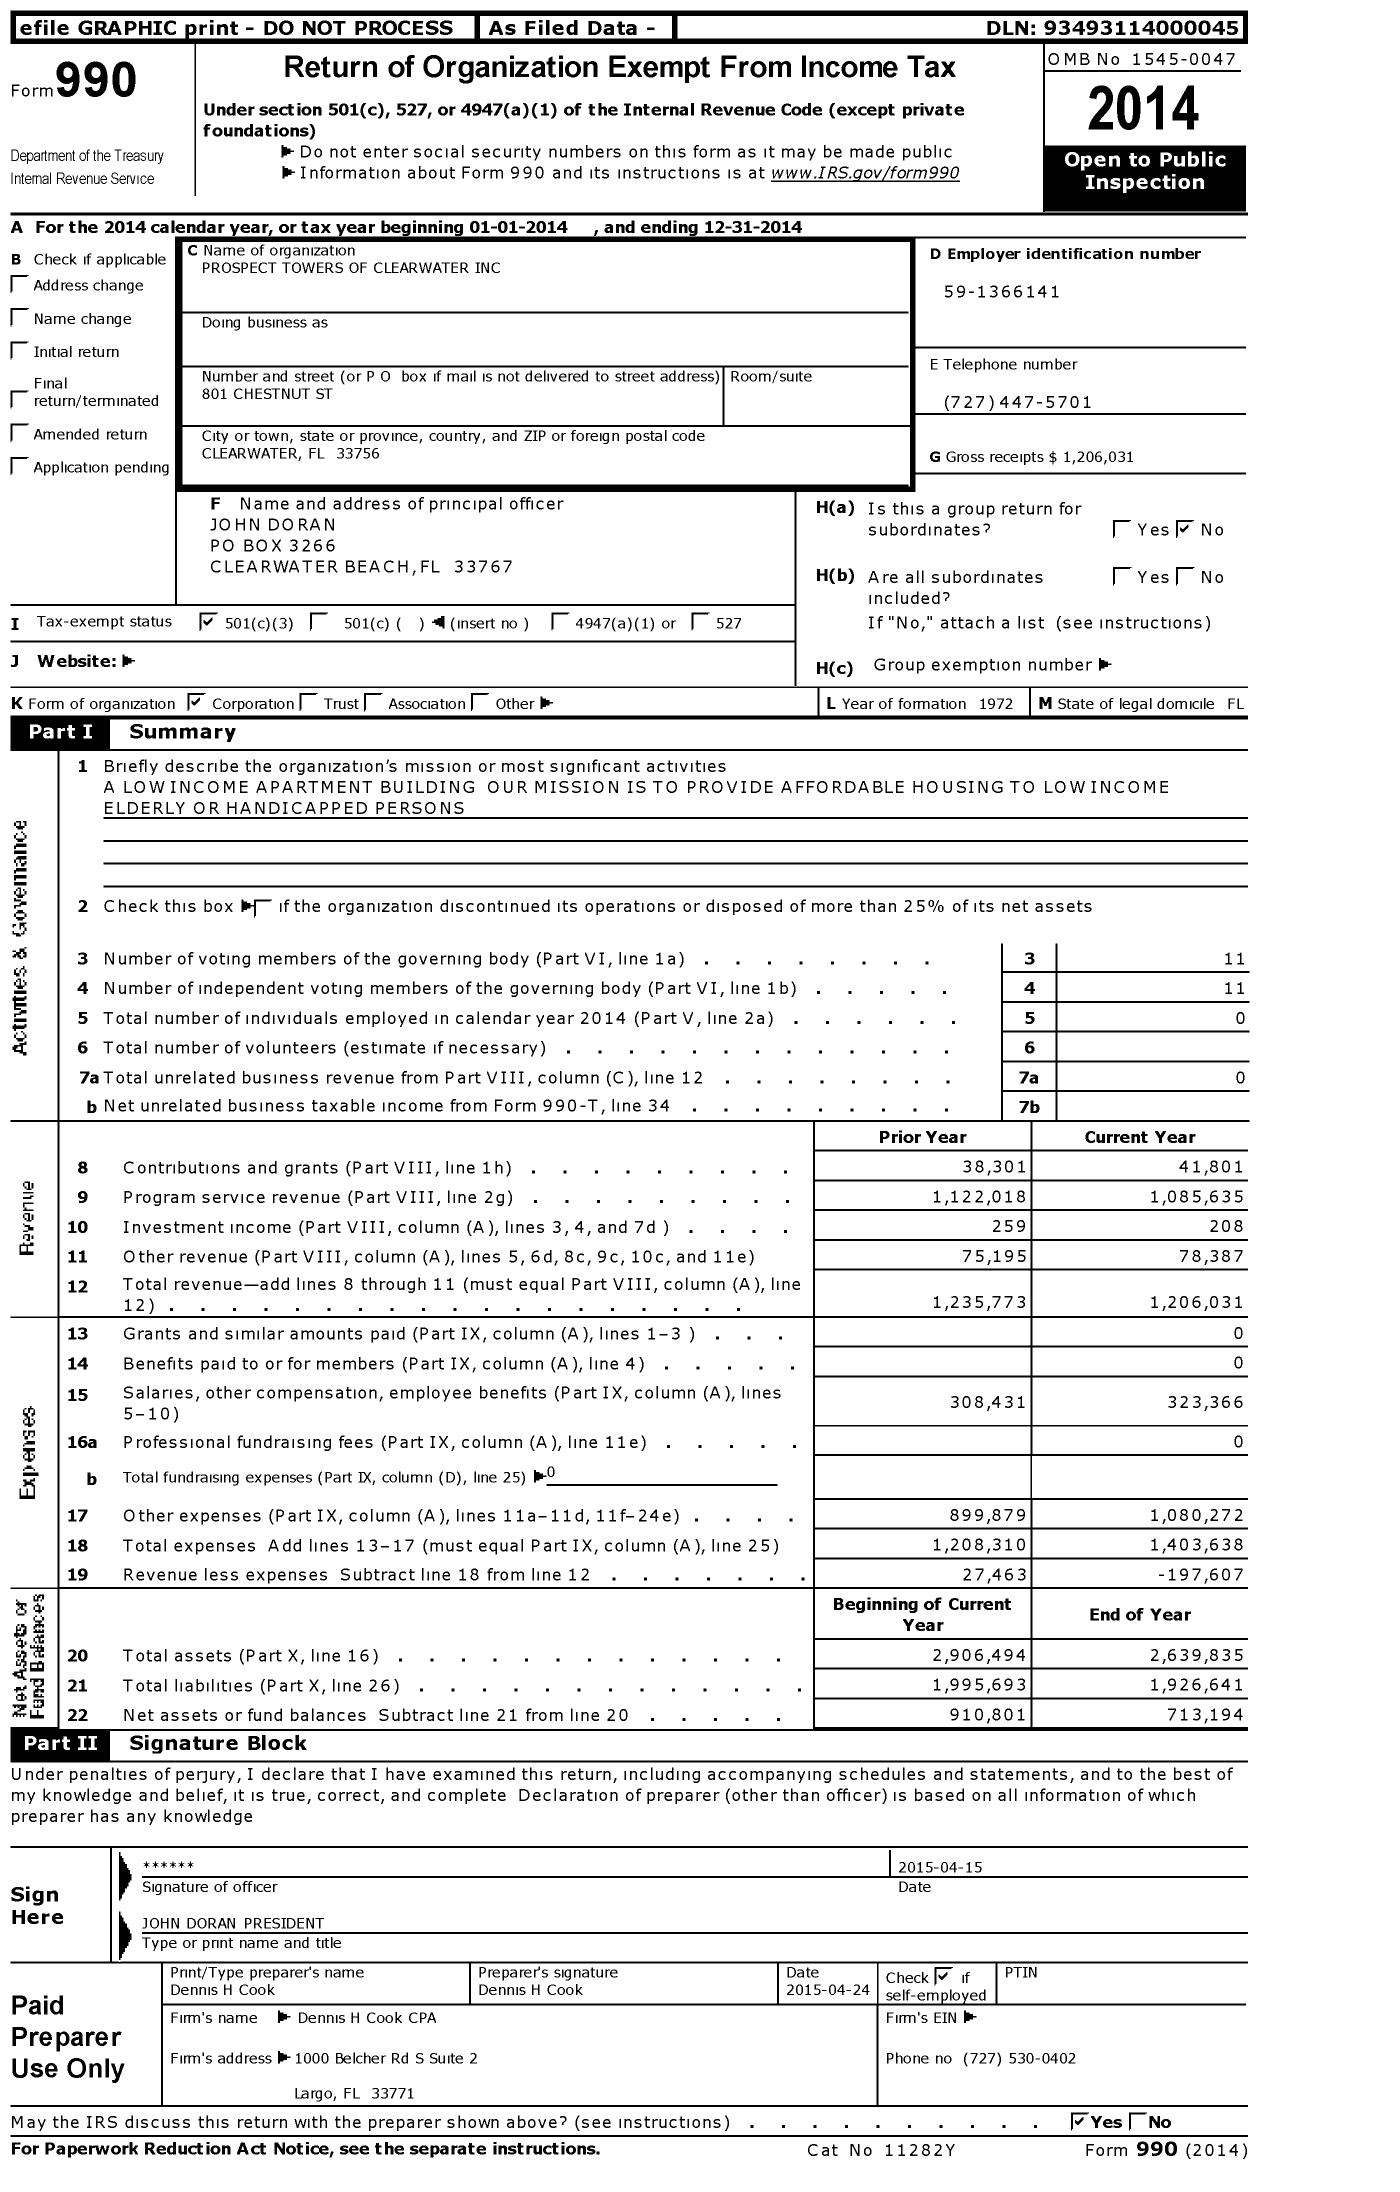 Image of first page of 2014 Form 990 for Prospect Towers of Clearwater